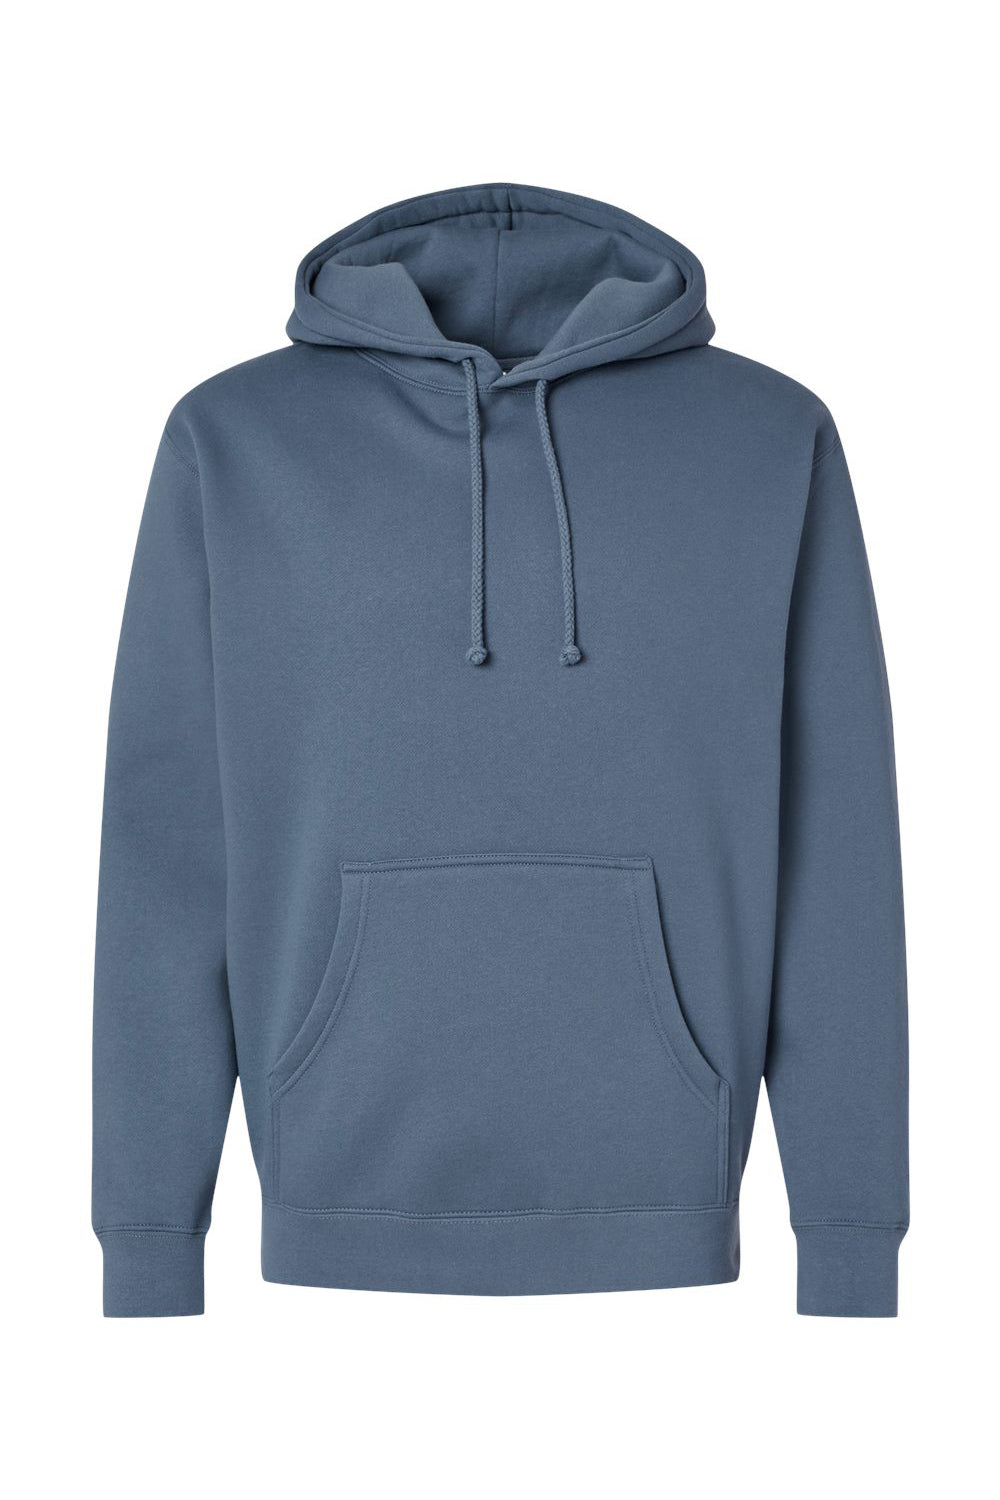 Independent Trading Co. IND4000 Mens Hooded Sweatshirt Hoodie Storm Blue Flat Front